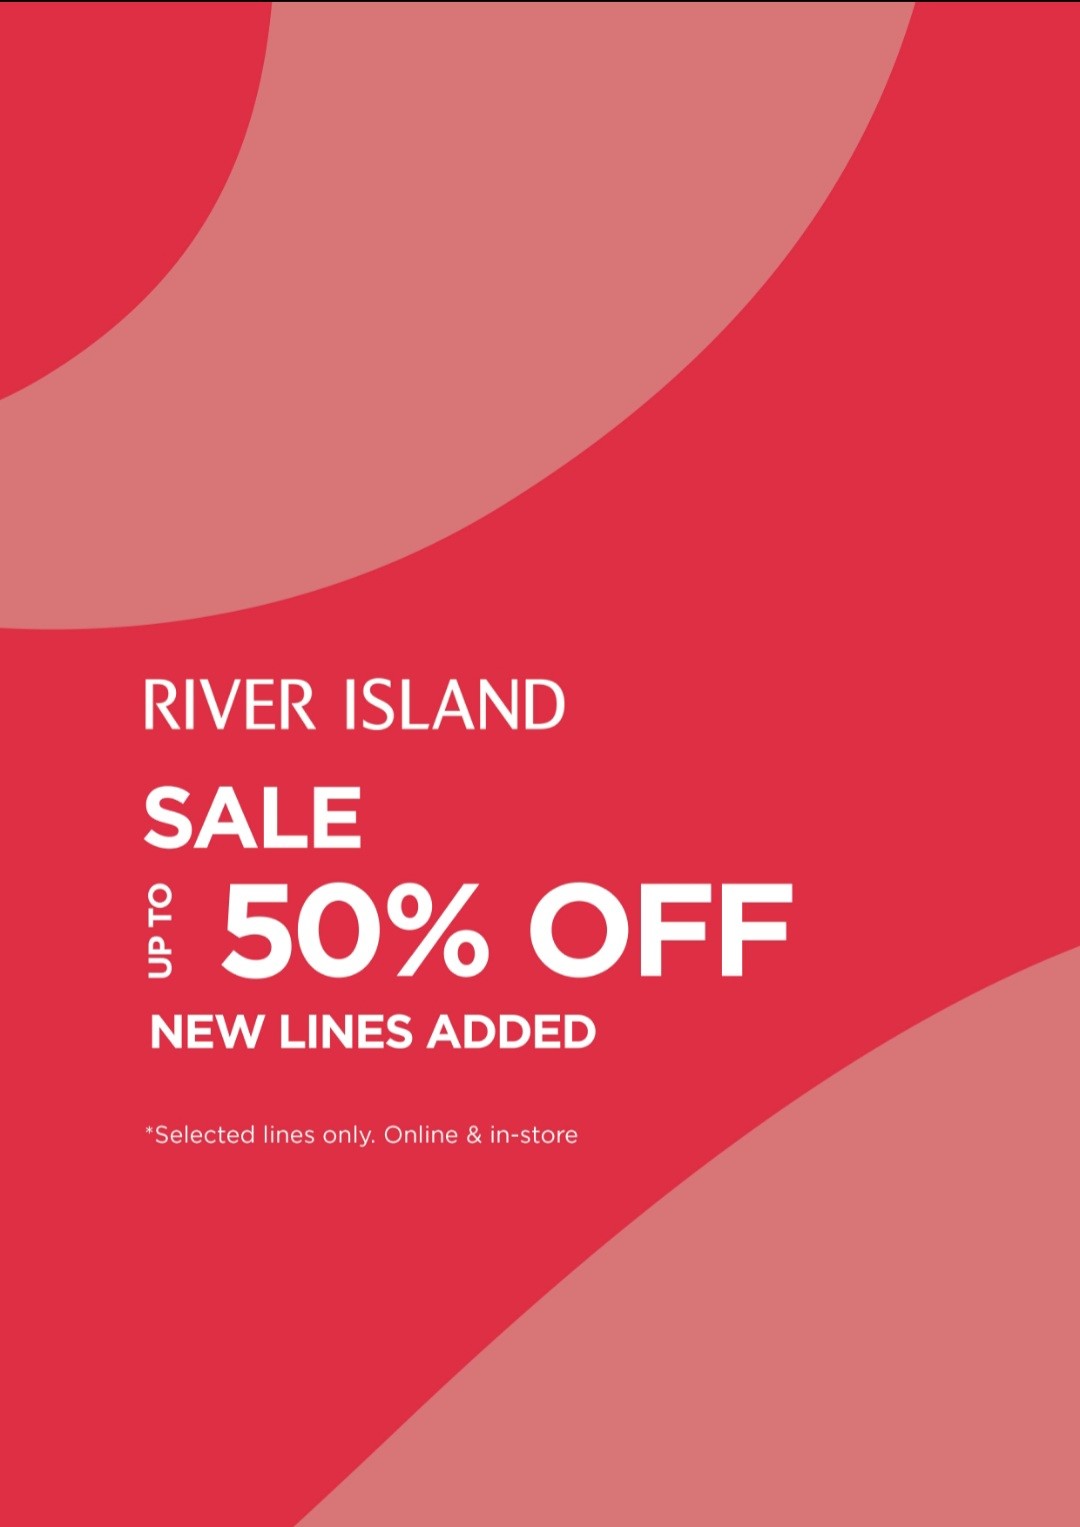 Up to 50% off at River Island!